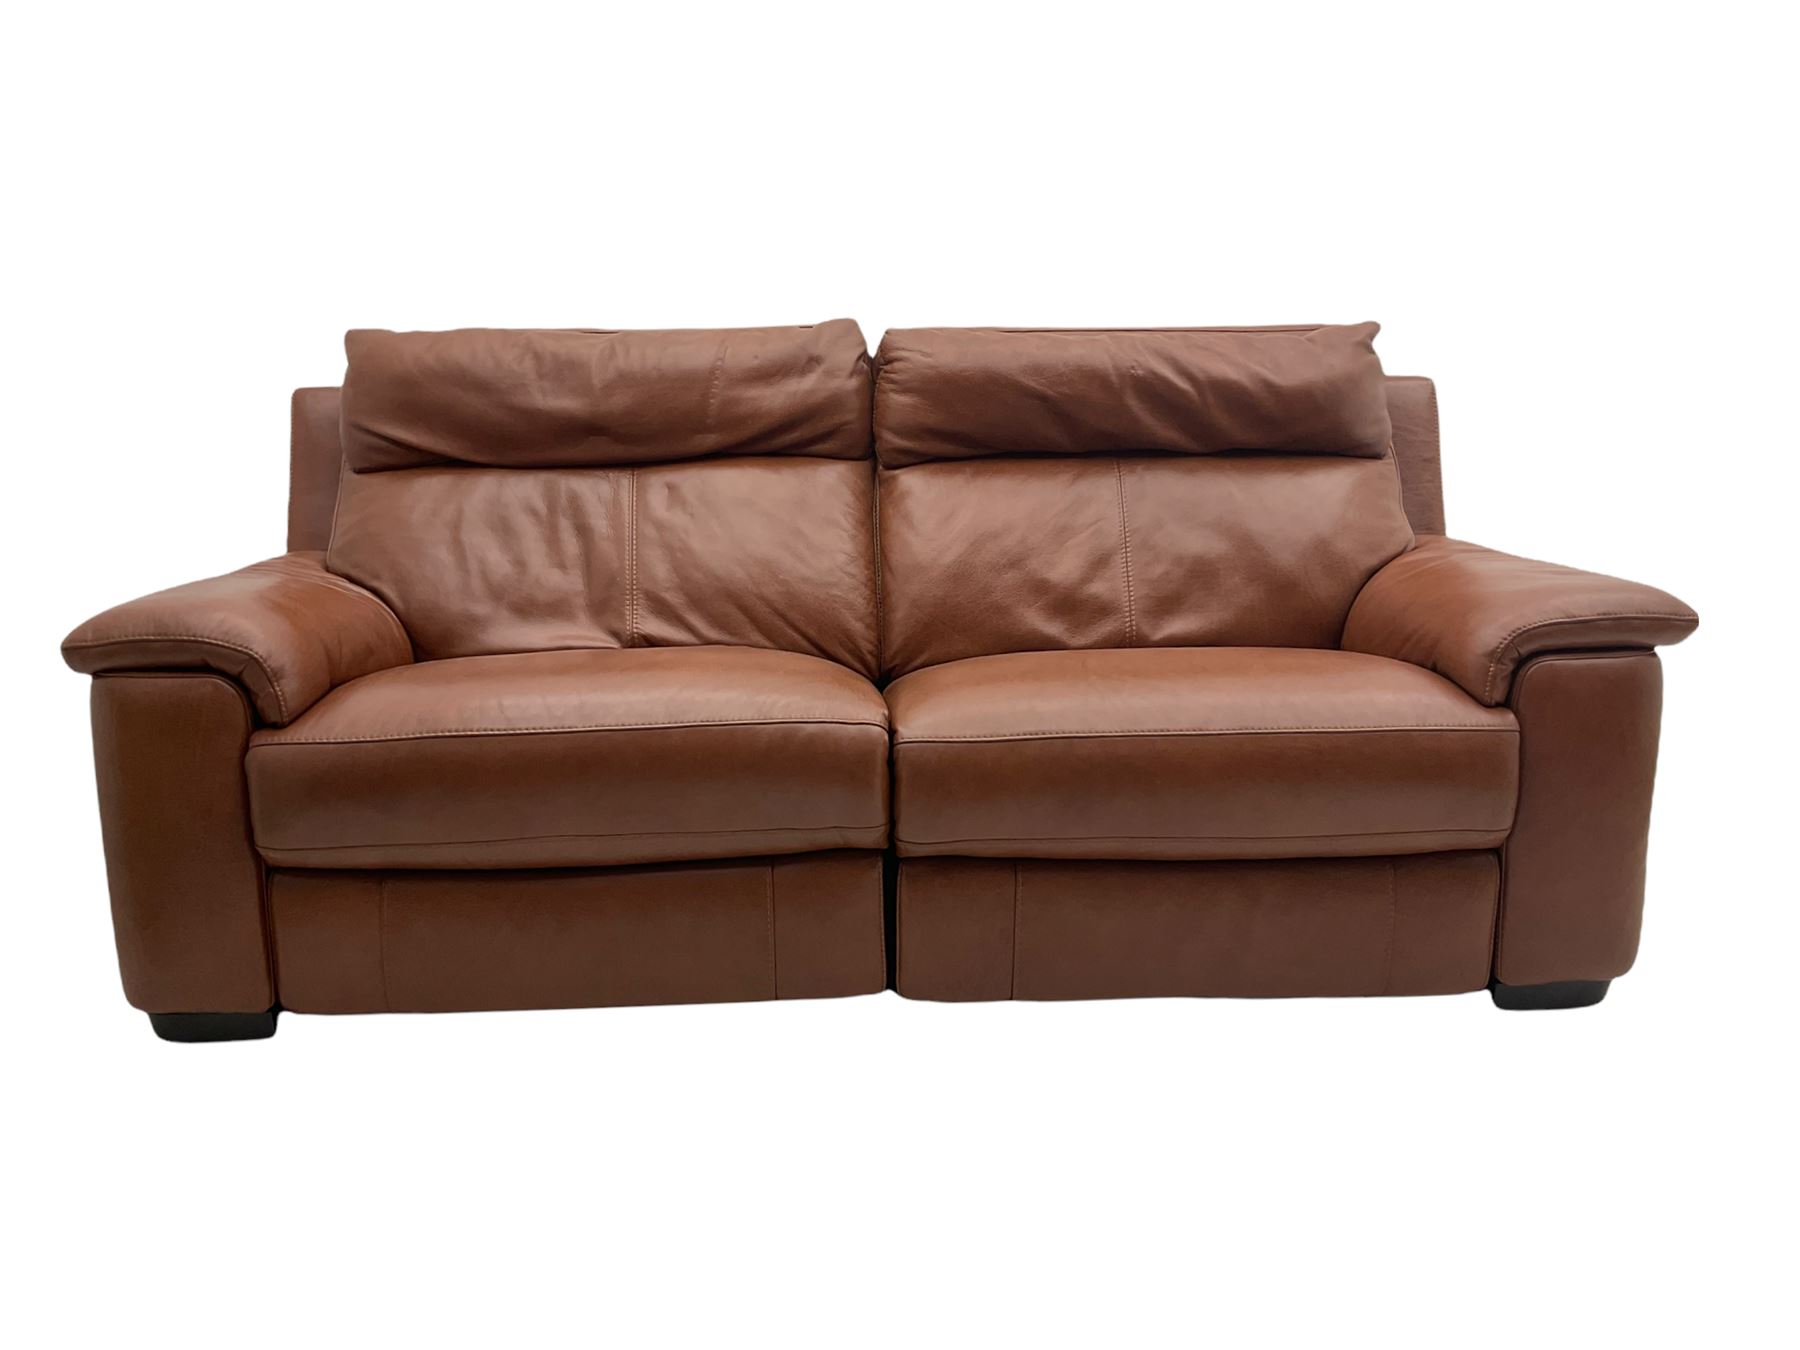 Three electric reclining sofa upholstered in tan leather - Image 2 of 23